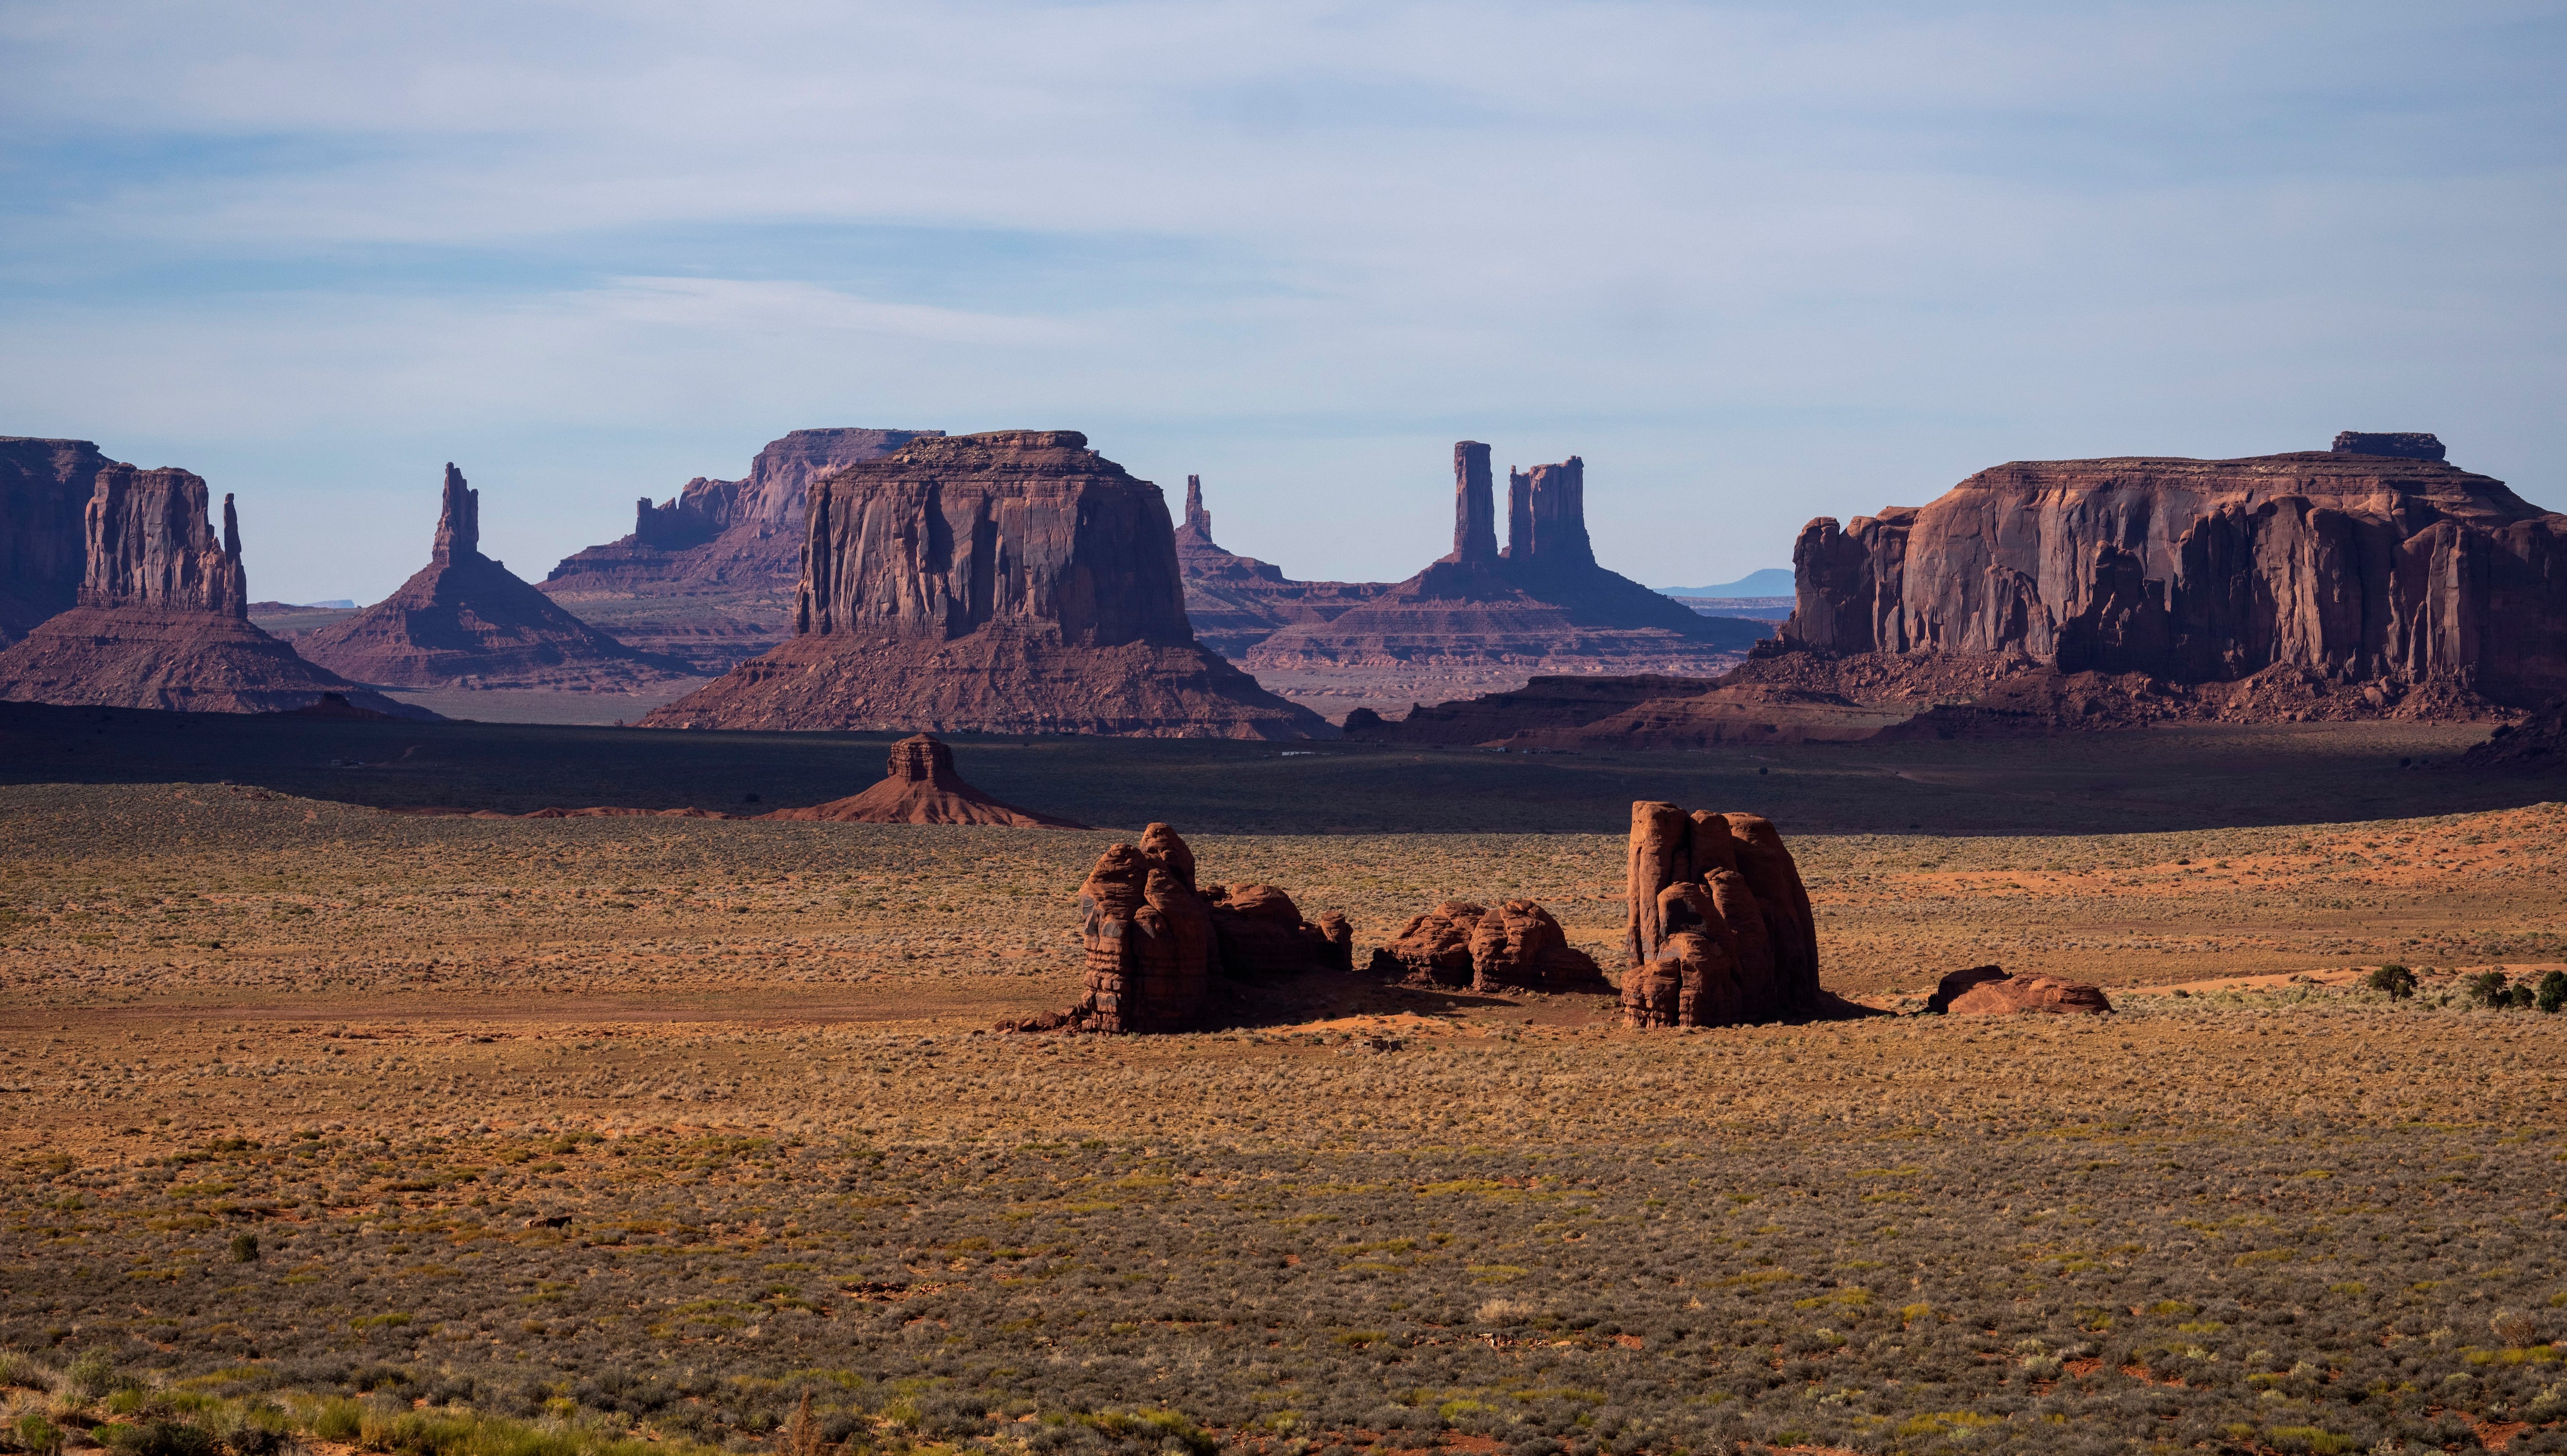 (Rick Egan | The Salt Lake Tribune)
View of Monument Valley, with the Bears Ears in the distance, from the Pine Spring in Monument Valley, on Thursday, May 26, 2022.
